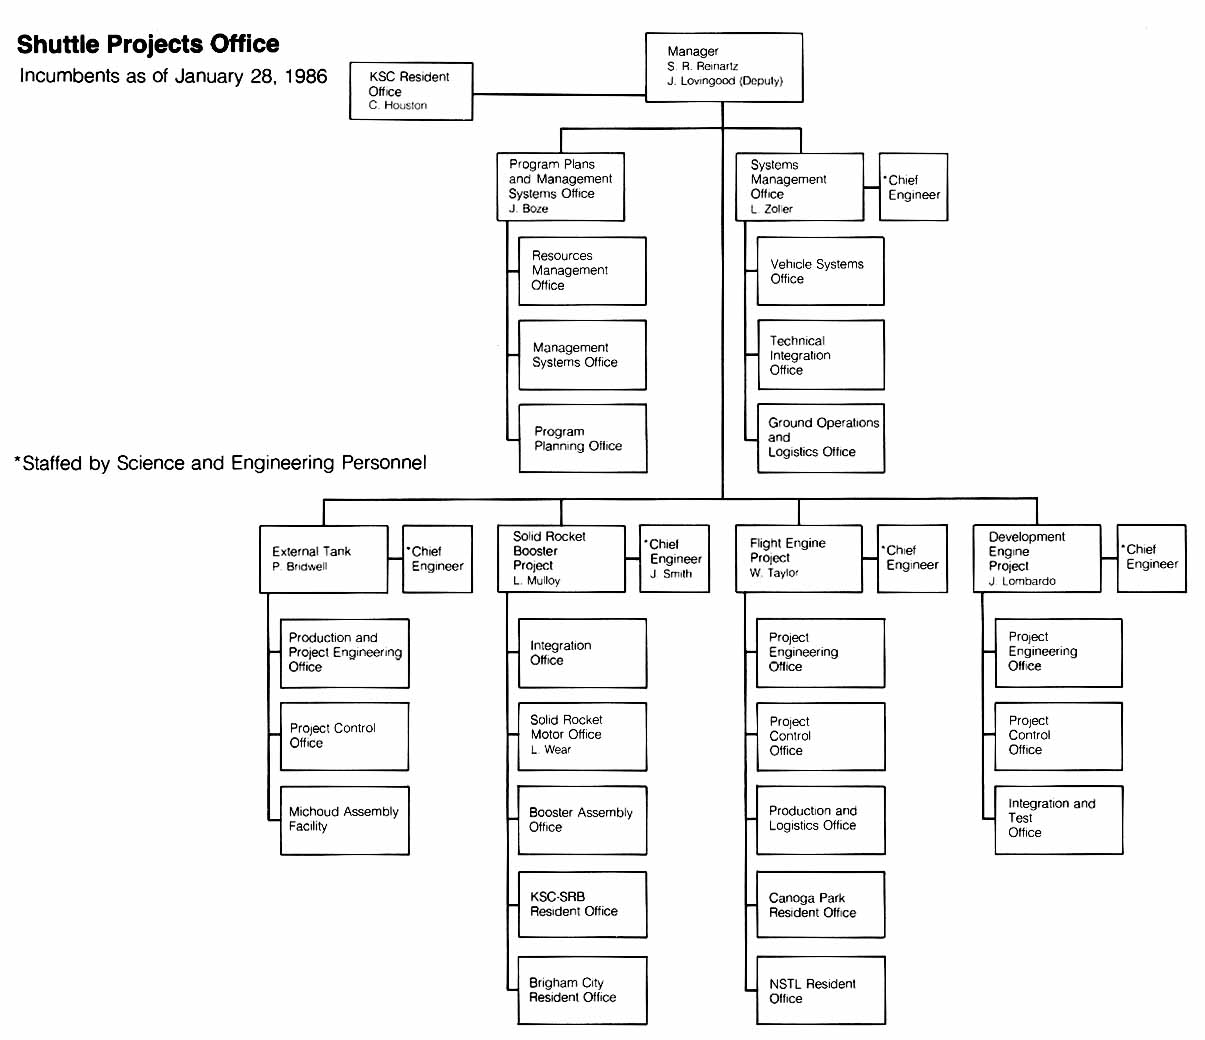 George C. Marshall Space Flight Center Organization Charts- Shuttle Projects Office (incumbents as of January 28, 1986).